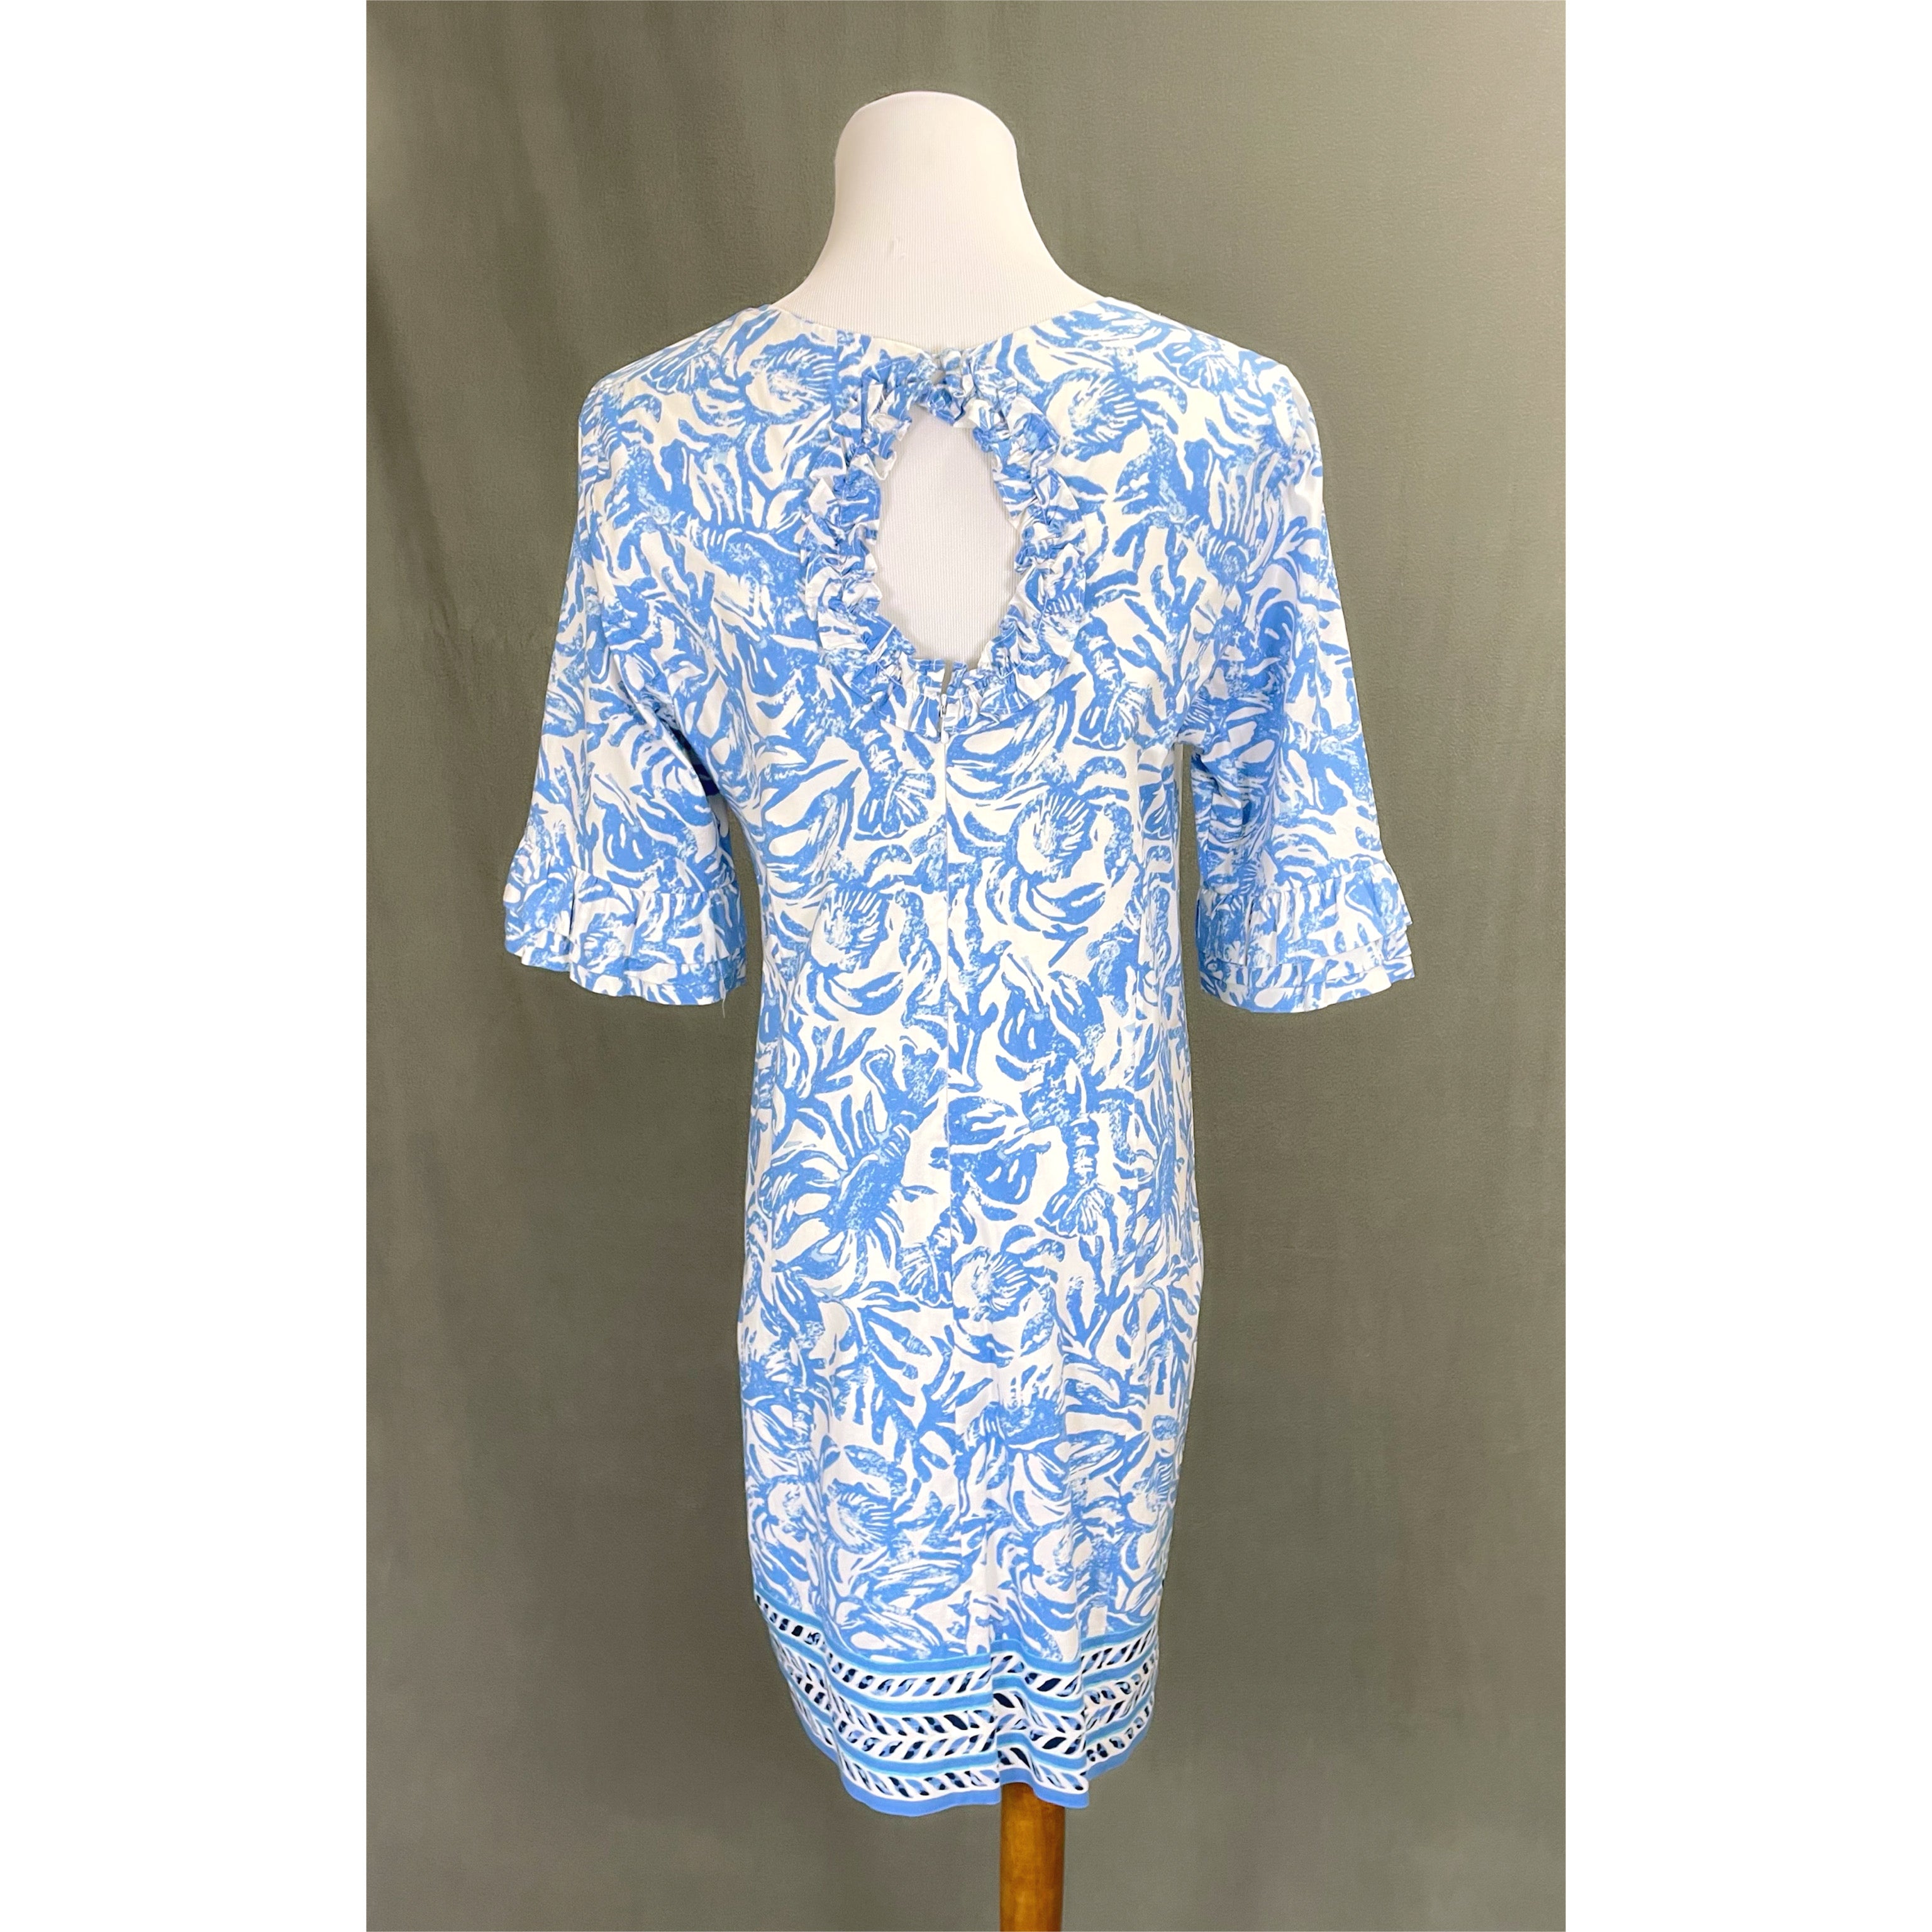 Lilly Pulitzer blue and white dress, size 6